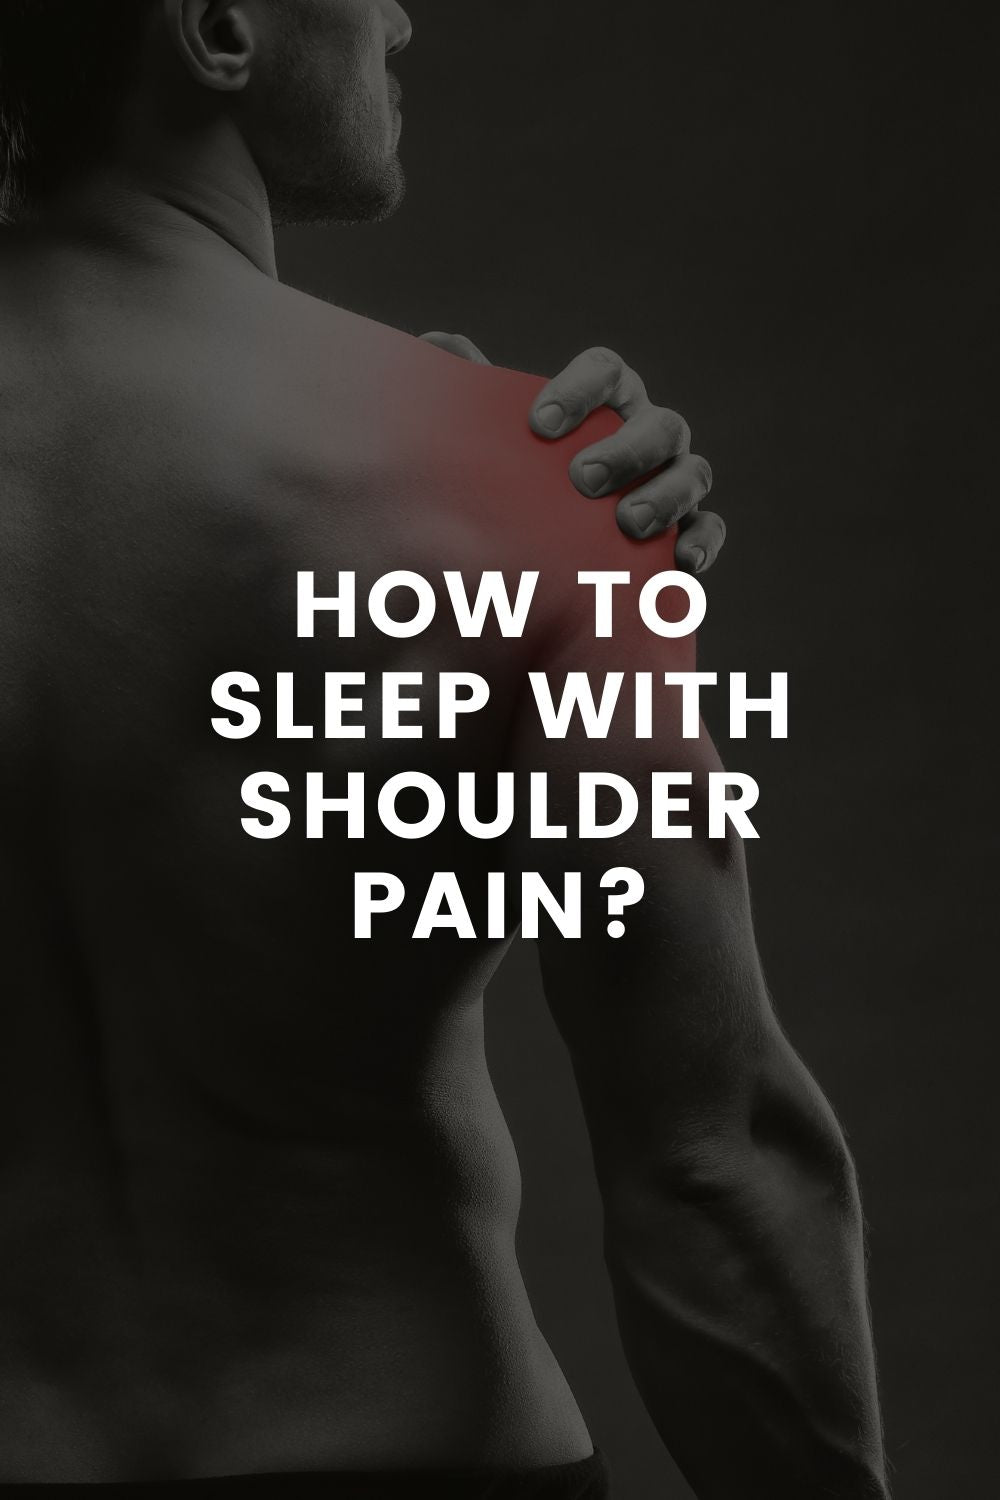 How to Sleep With Shoulder Pain?